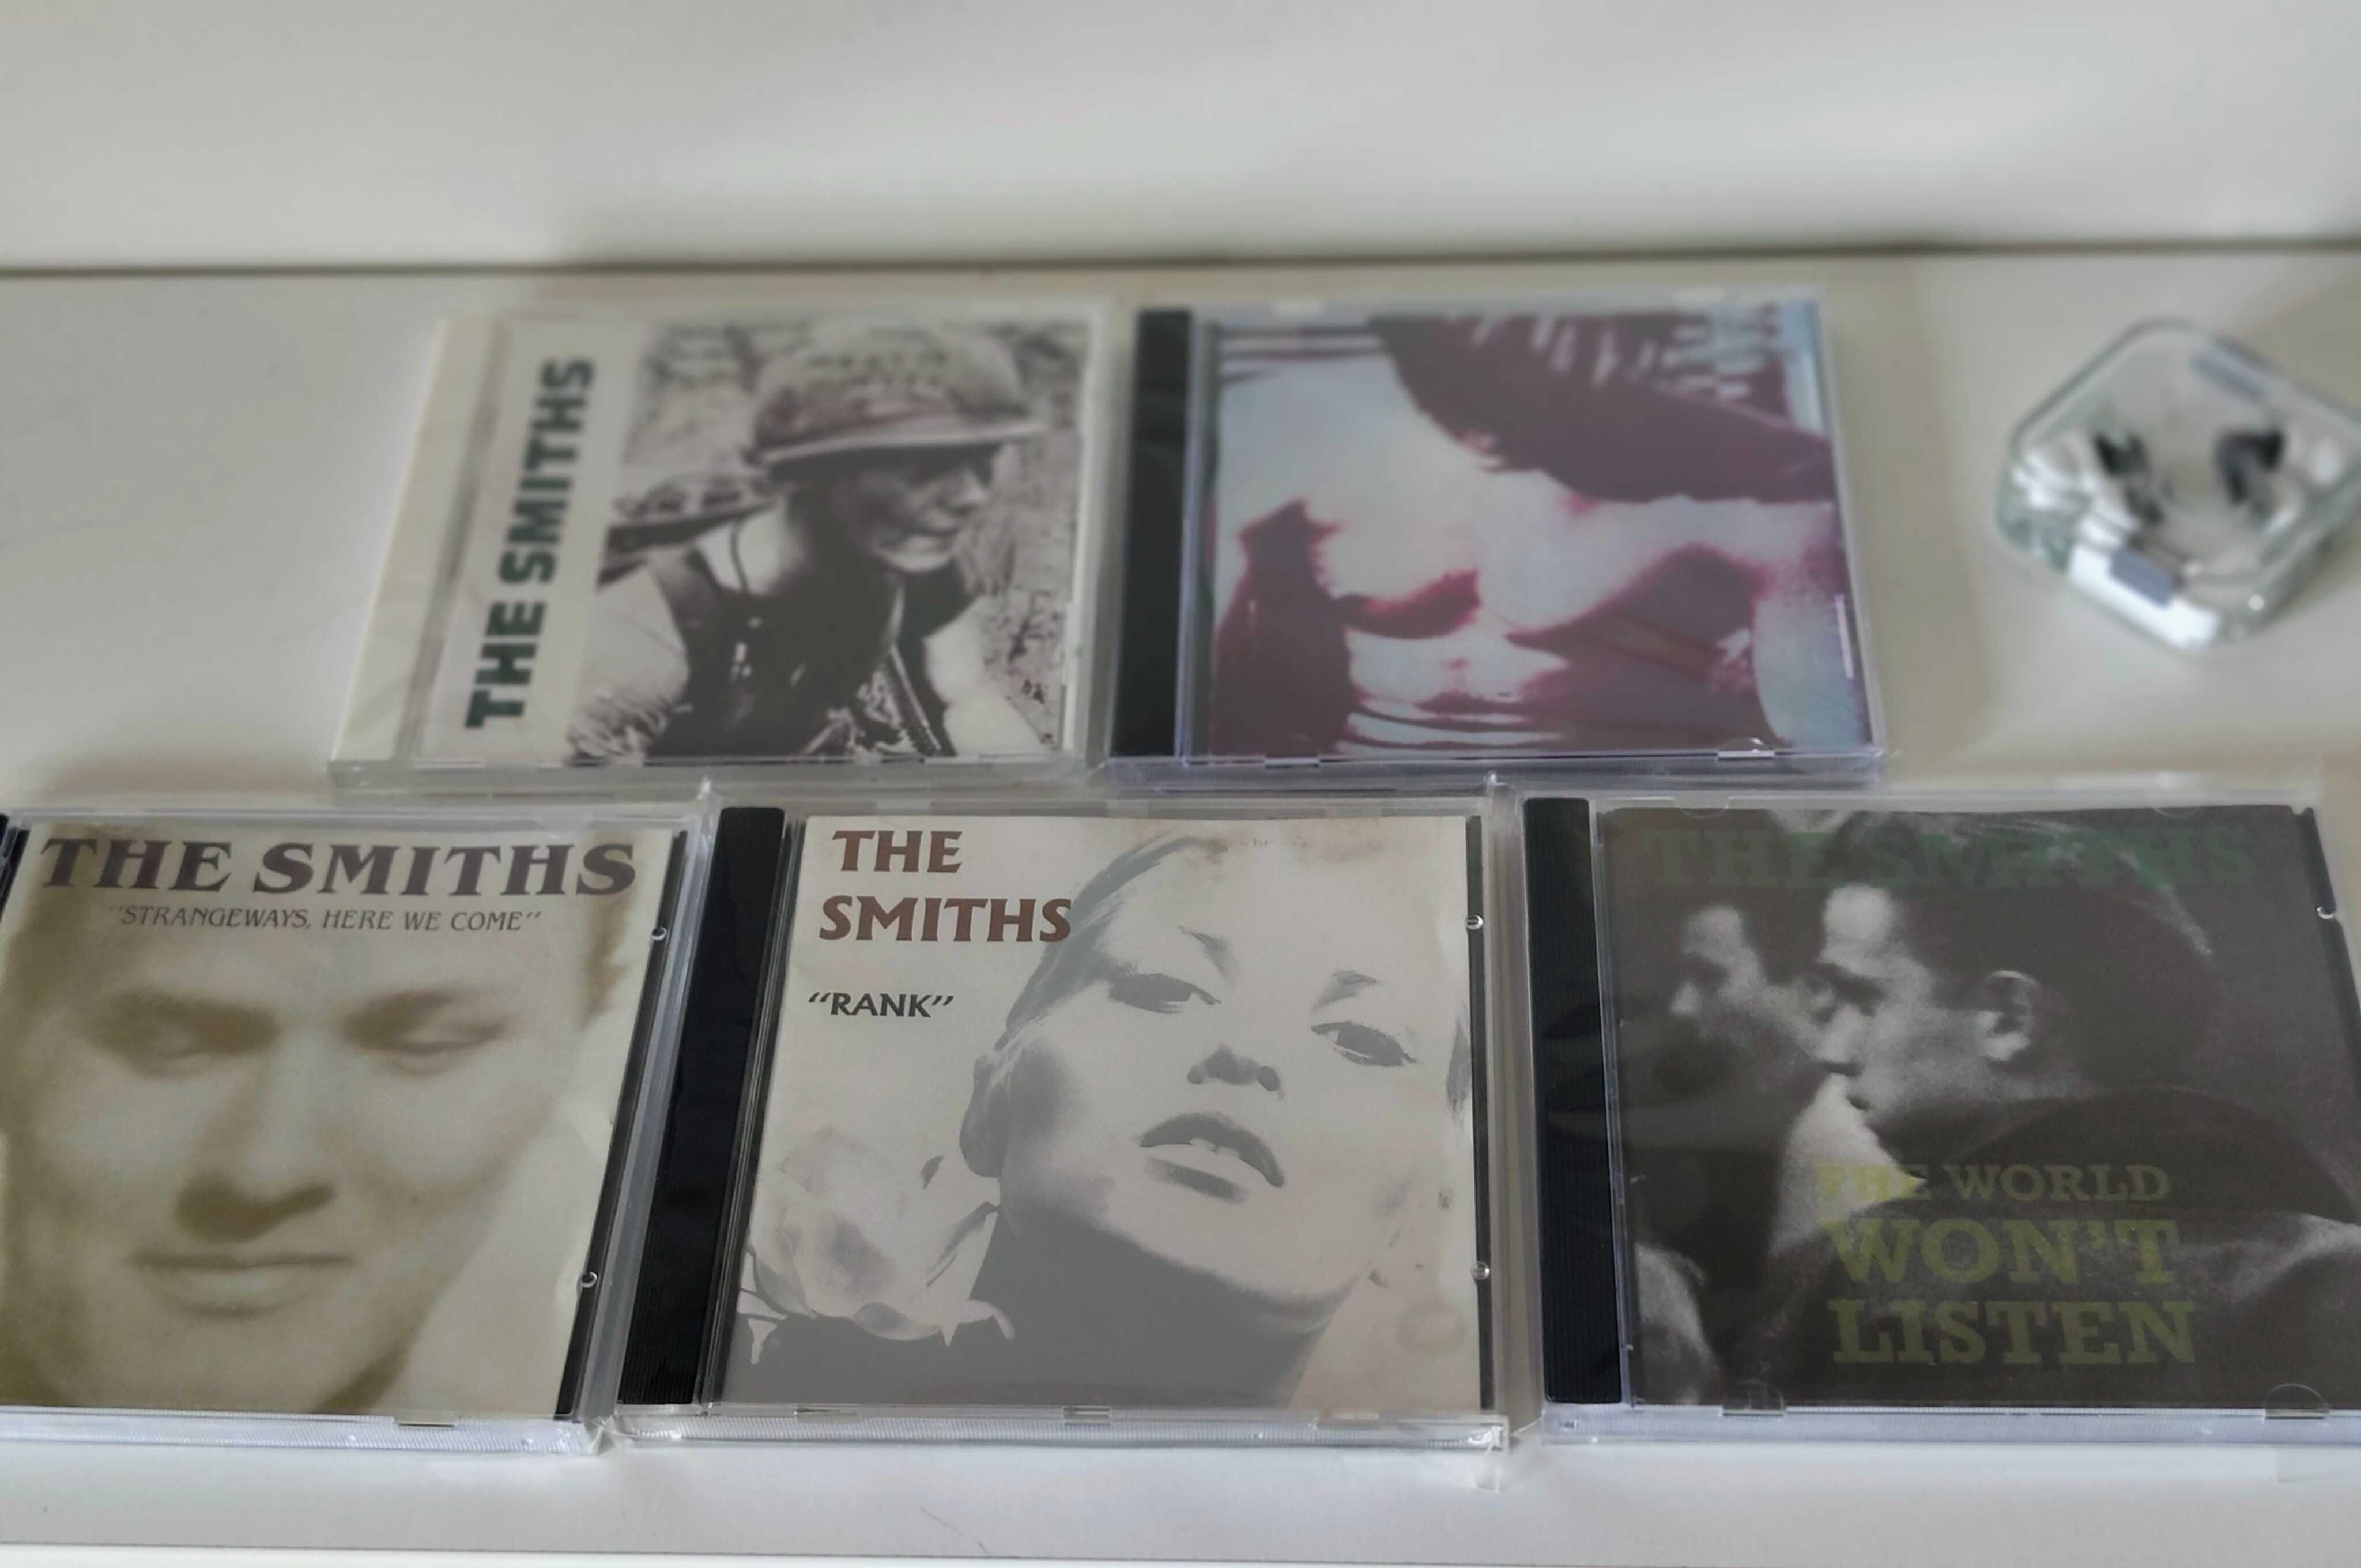 The Smiths (CDs)